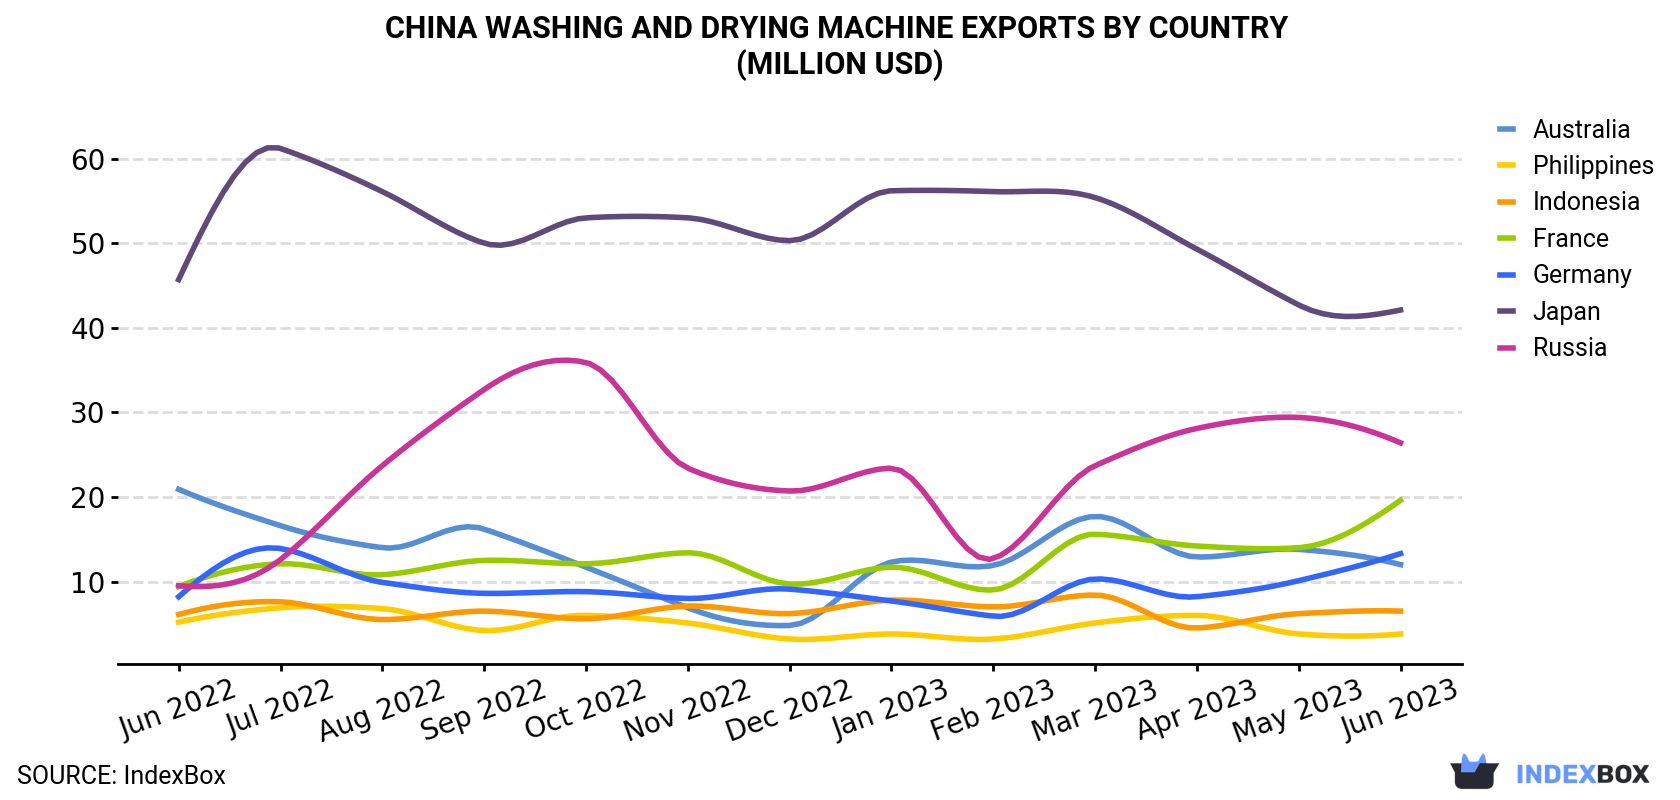 China Washing and Drying Machine Exports By Country (Million USD)